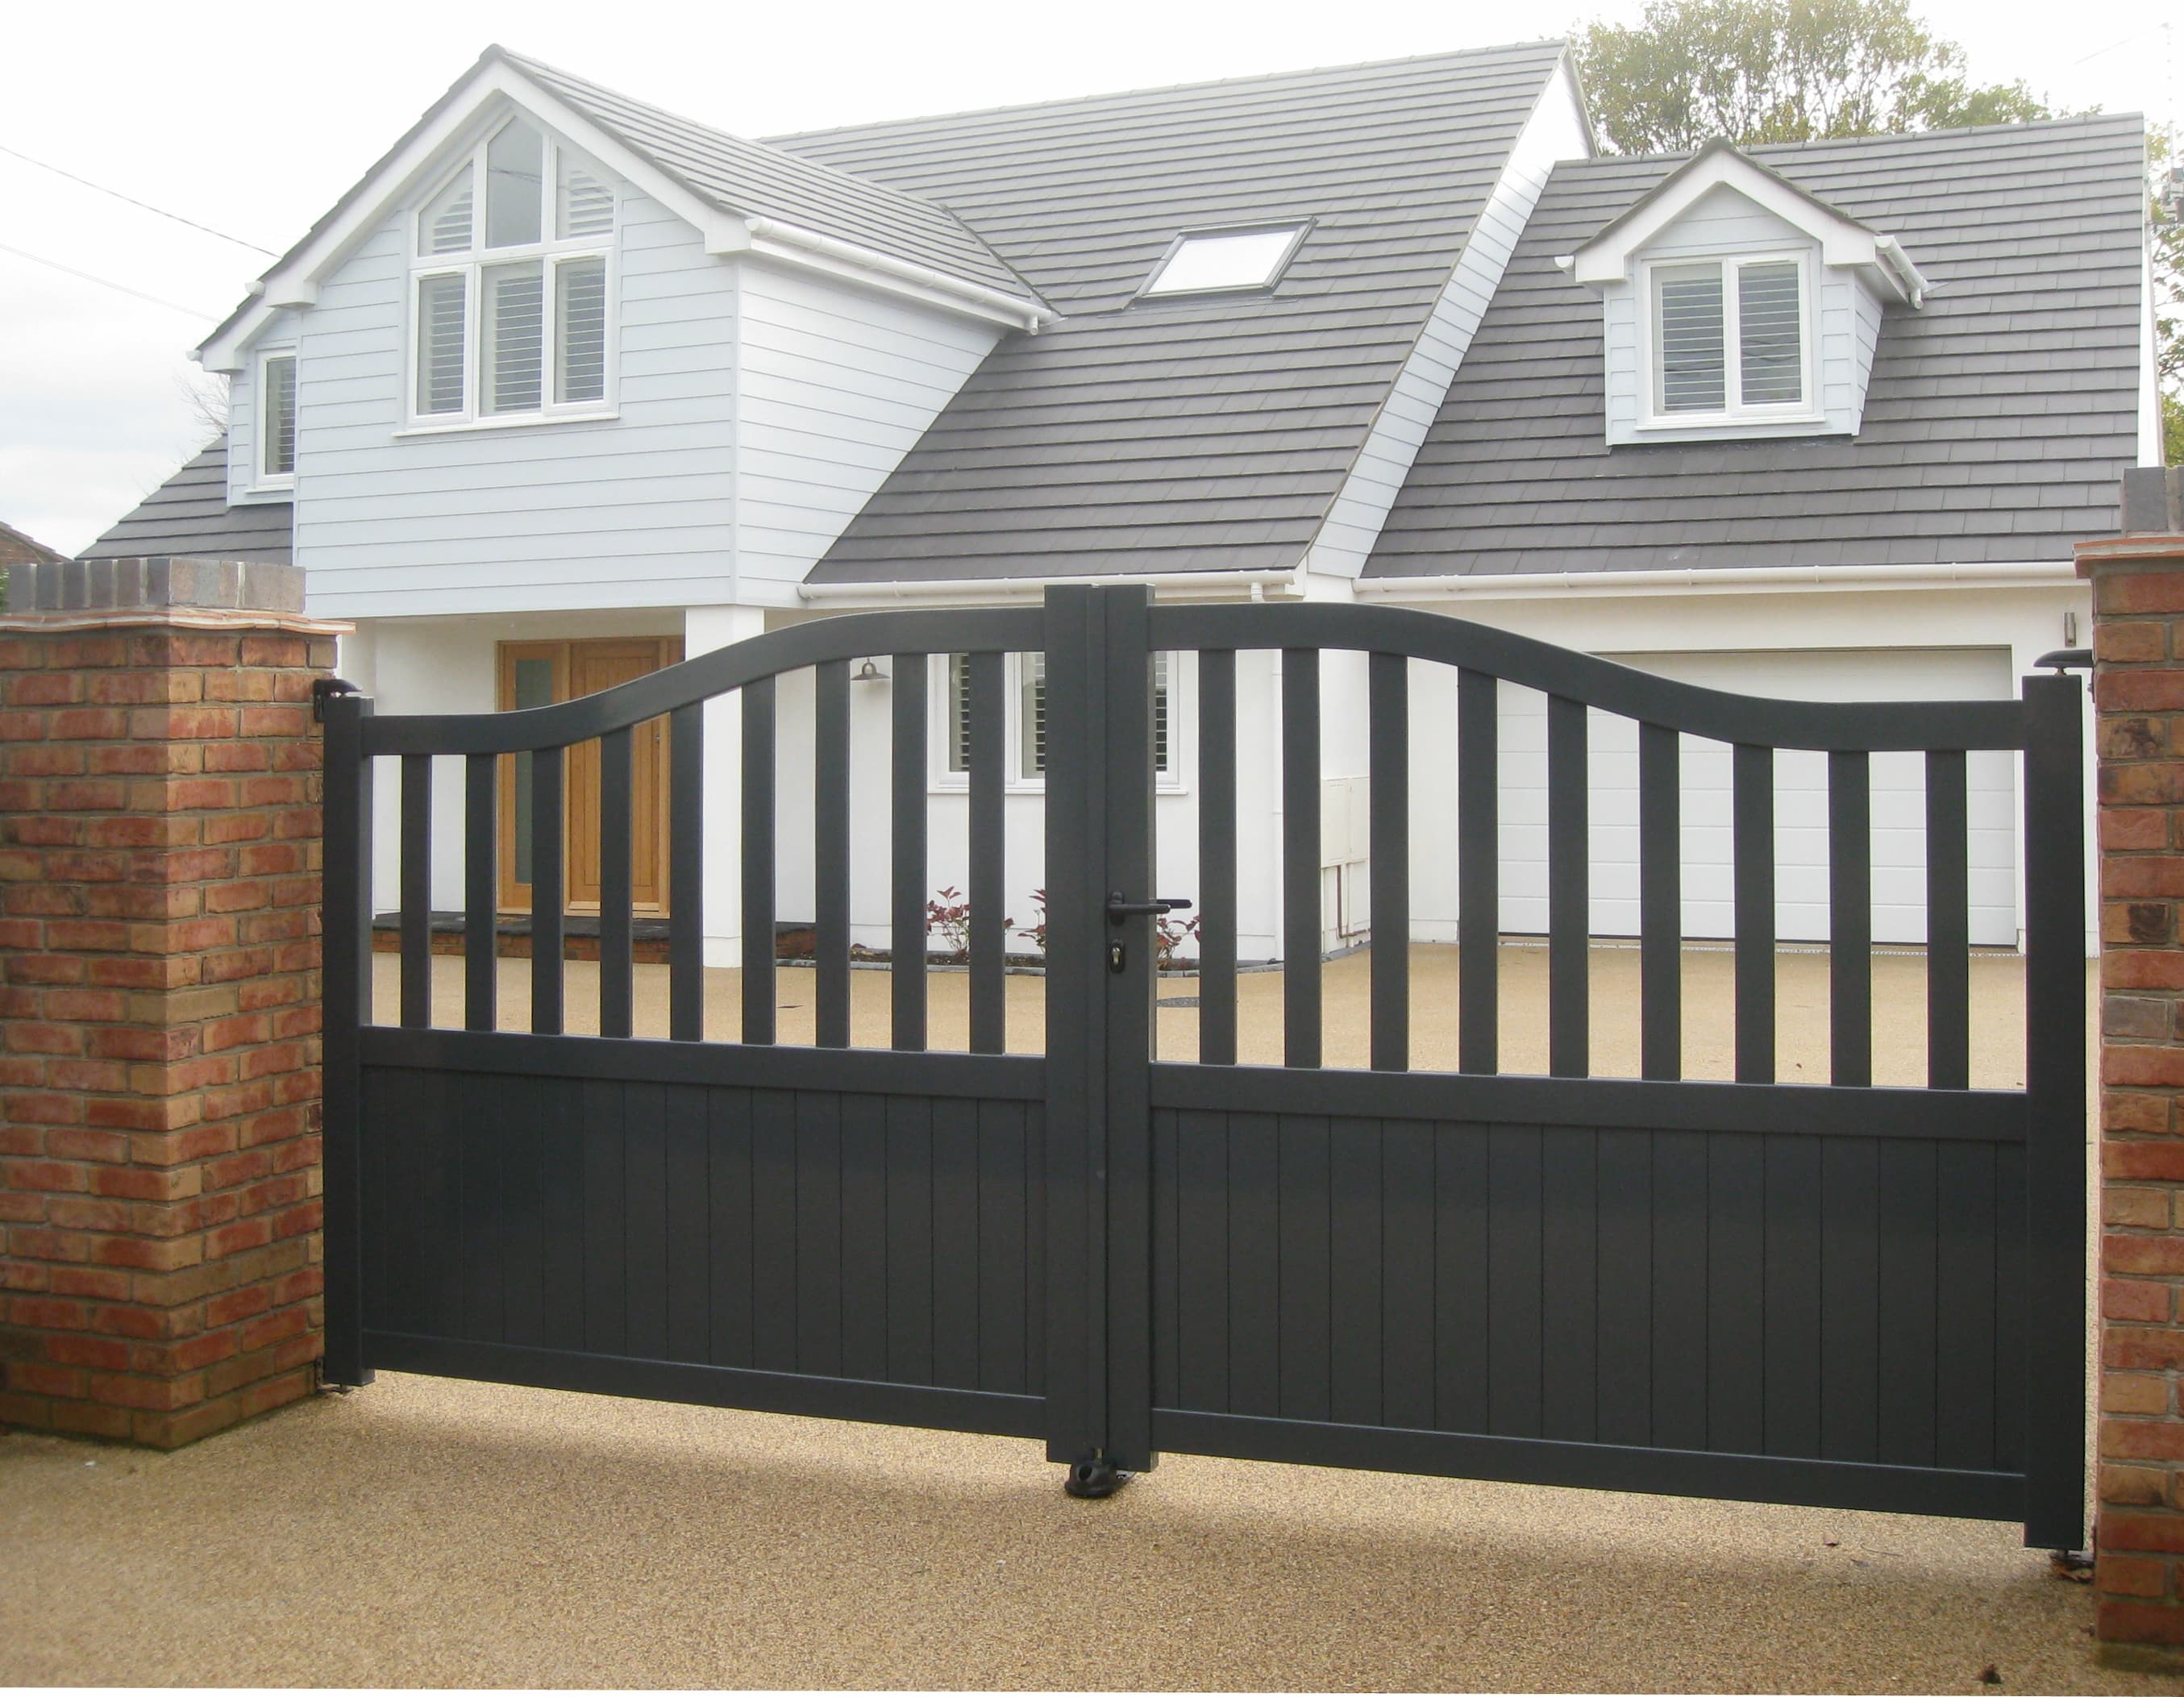 Charcoal grey aluminium driveway gate with curved top design, juxtaposed with brick pillars, in front of a modern white house with slate roofing and dormer windows.